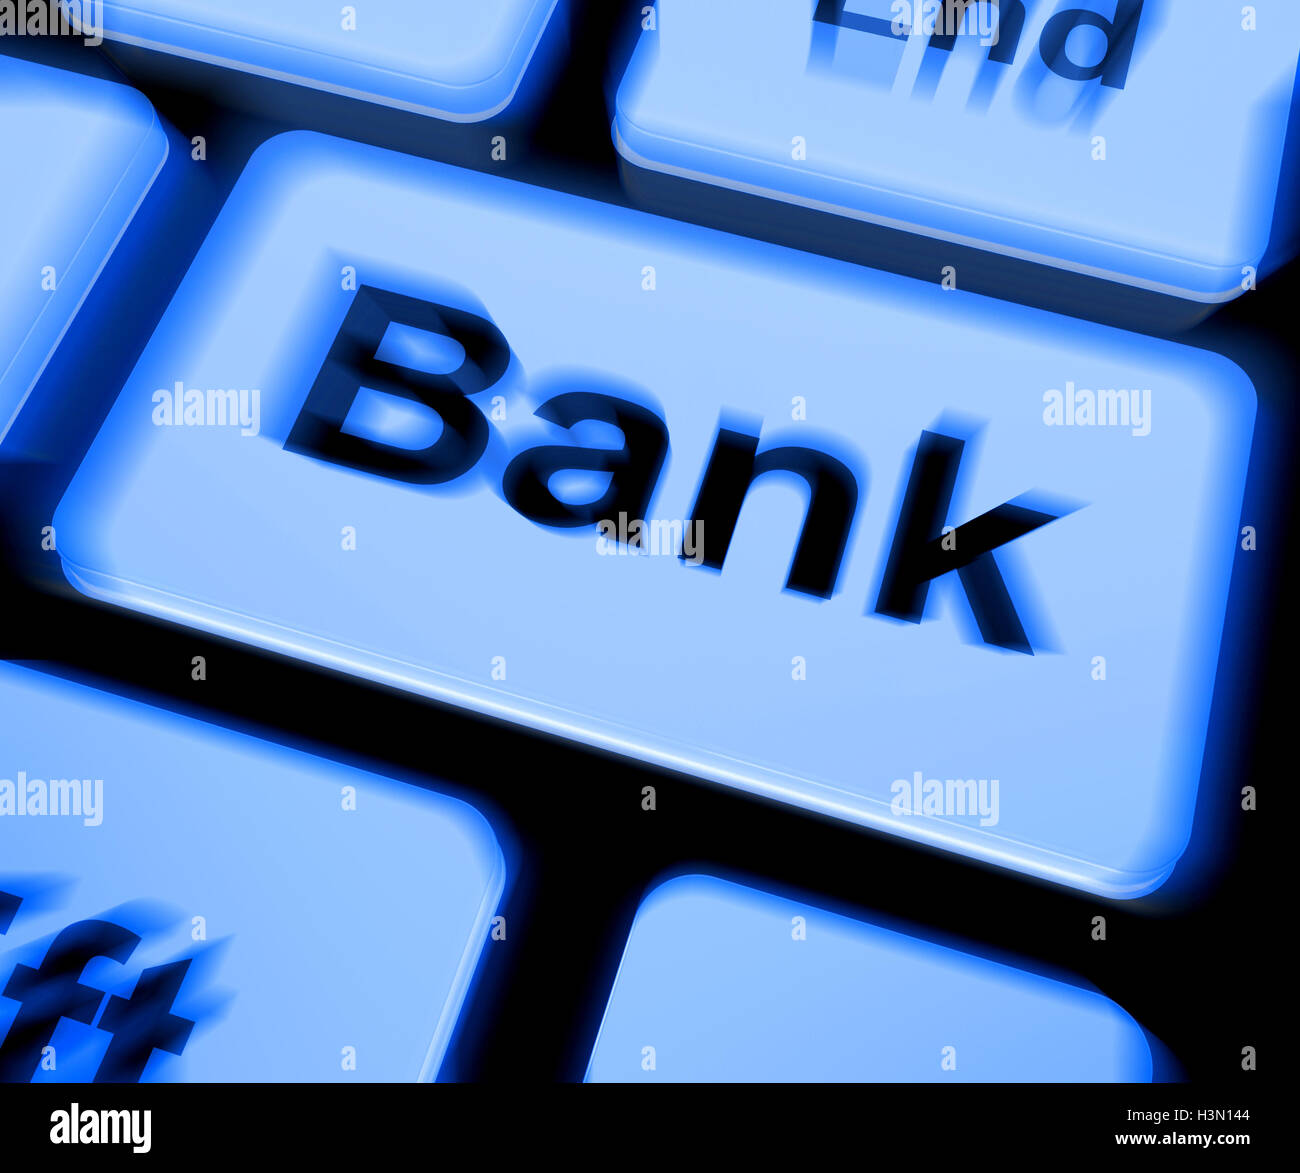 Bank Keyboard Shows Online Or Internet Banking Stock Photo